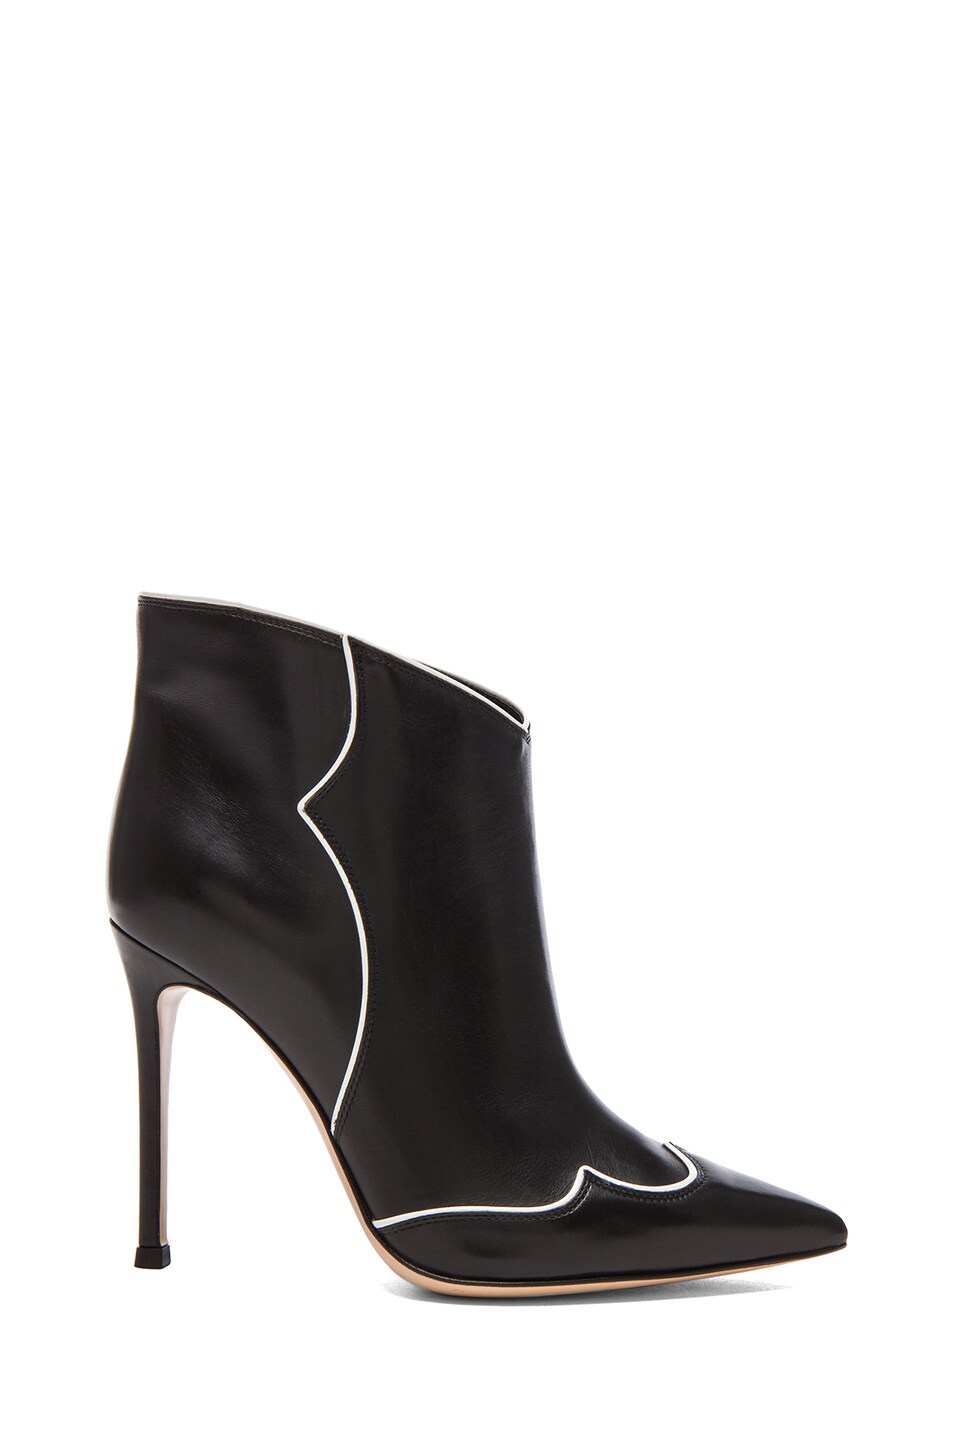 Gianvito Rossi Annie Leather Ankle Booties in Nero & Off White | FWRD